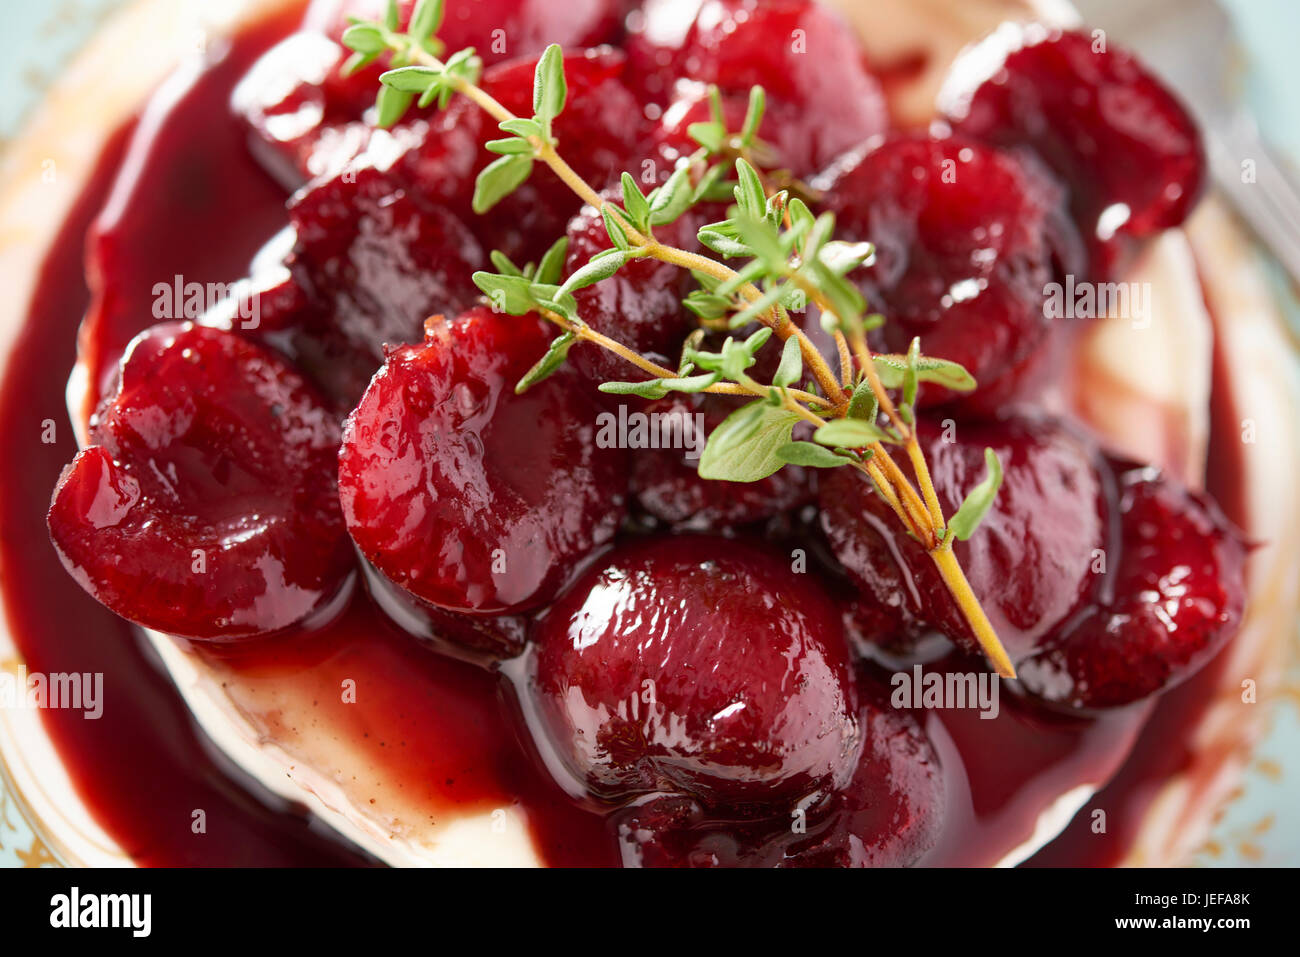 Brie cheese with warm cherry compote served on a blue plate Stock Photo